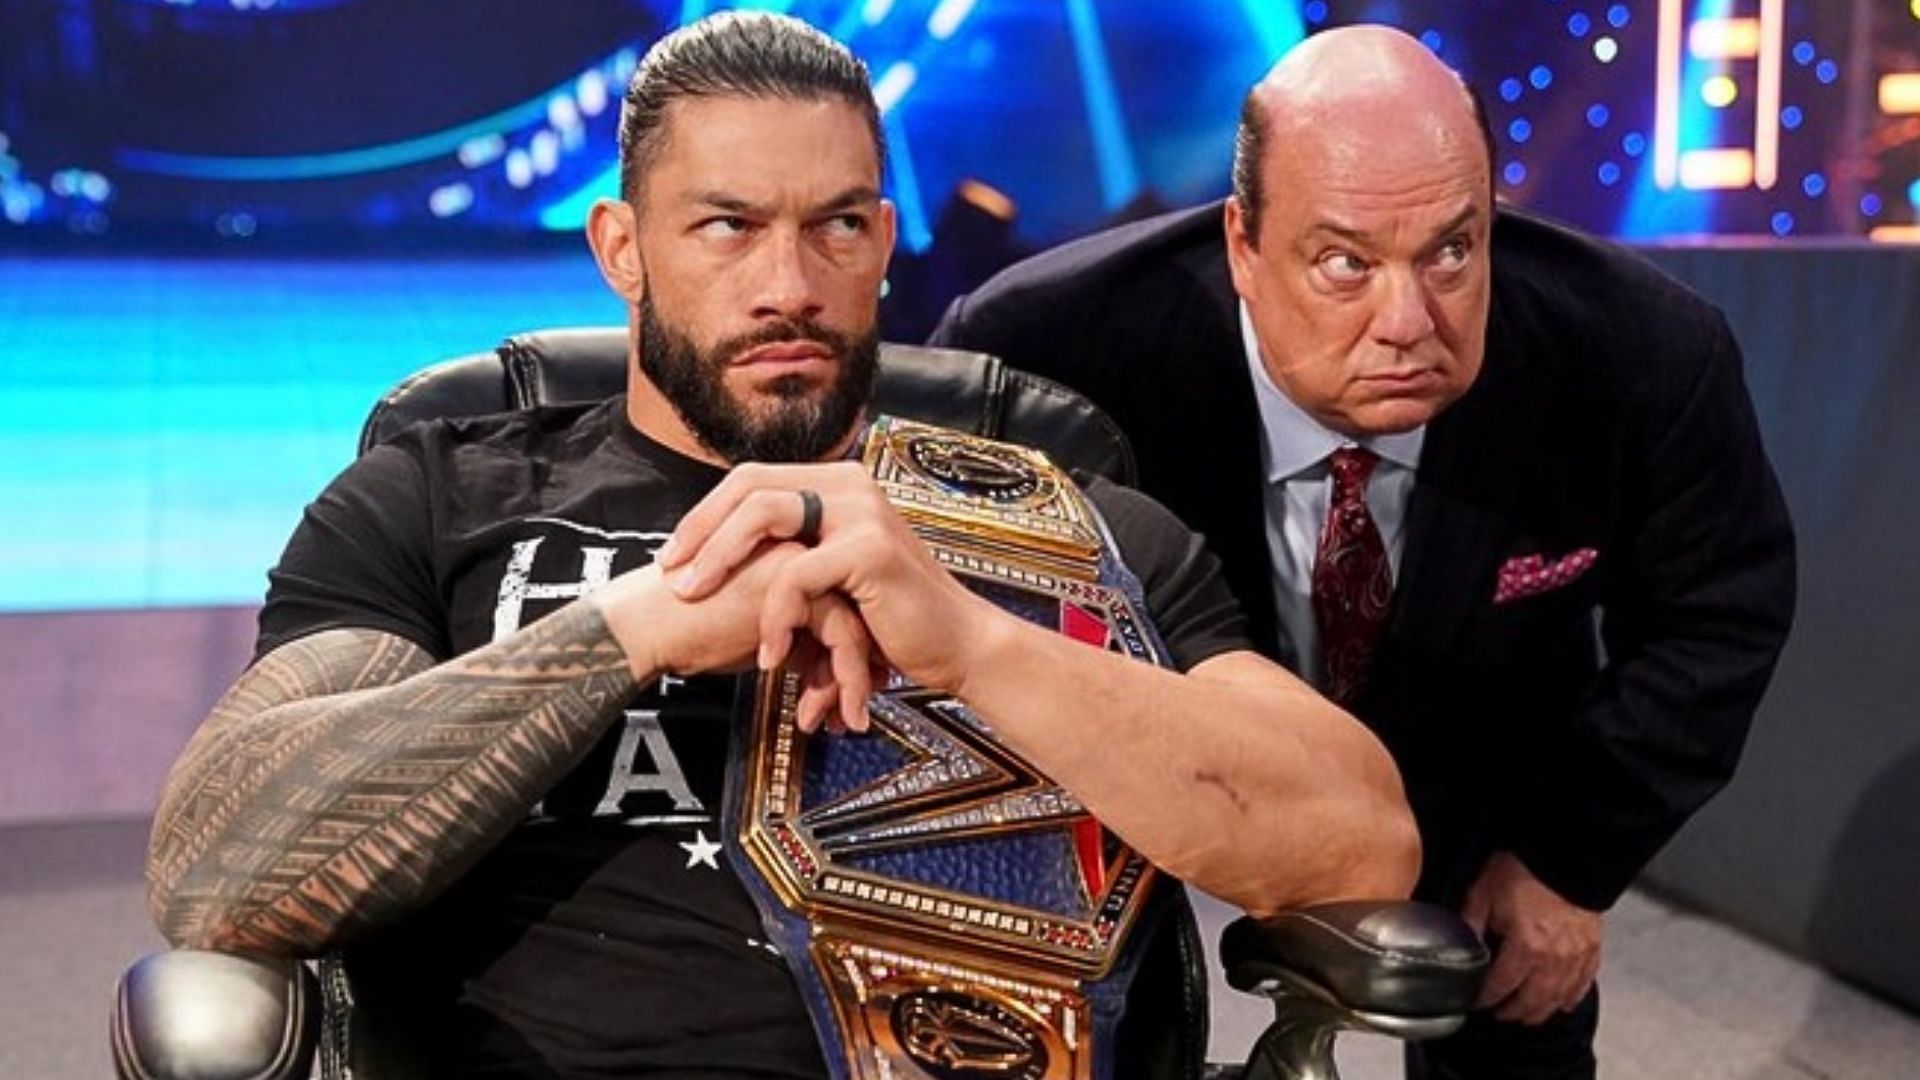 Roman Reigns may be taking time off in the coming weeks